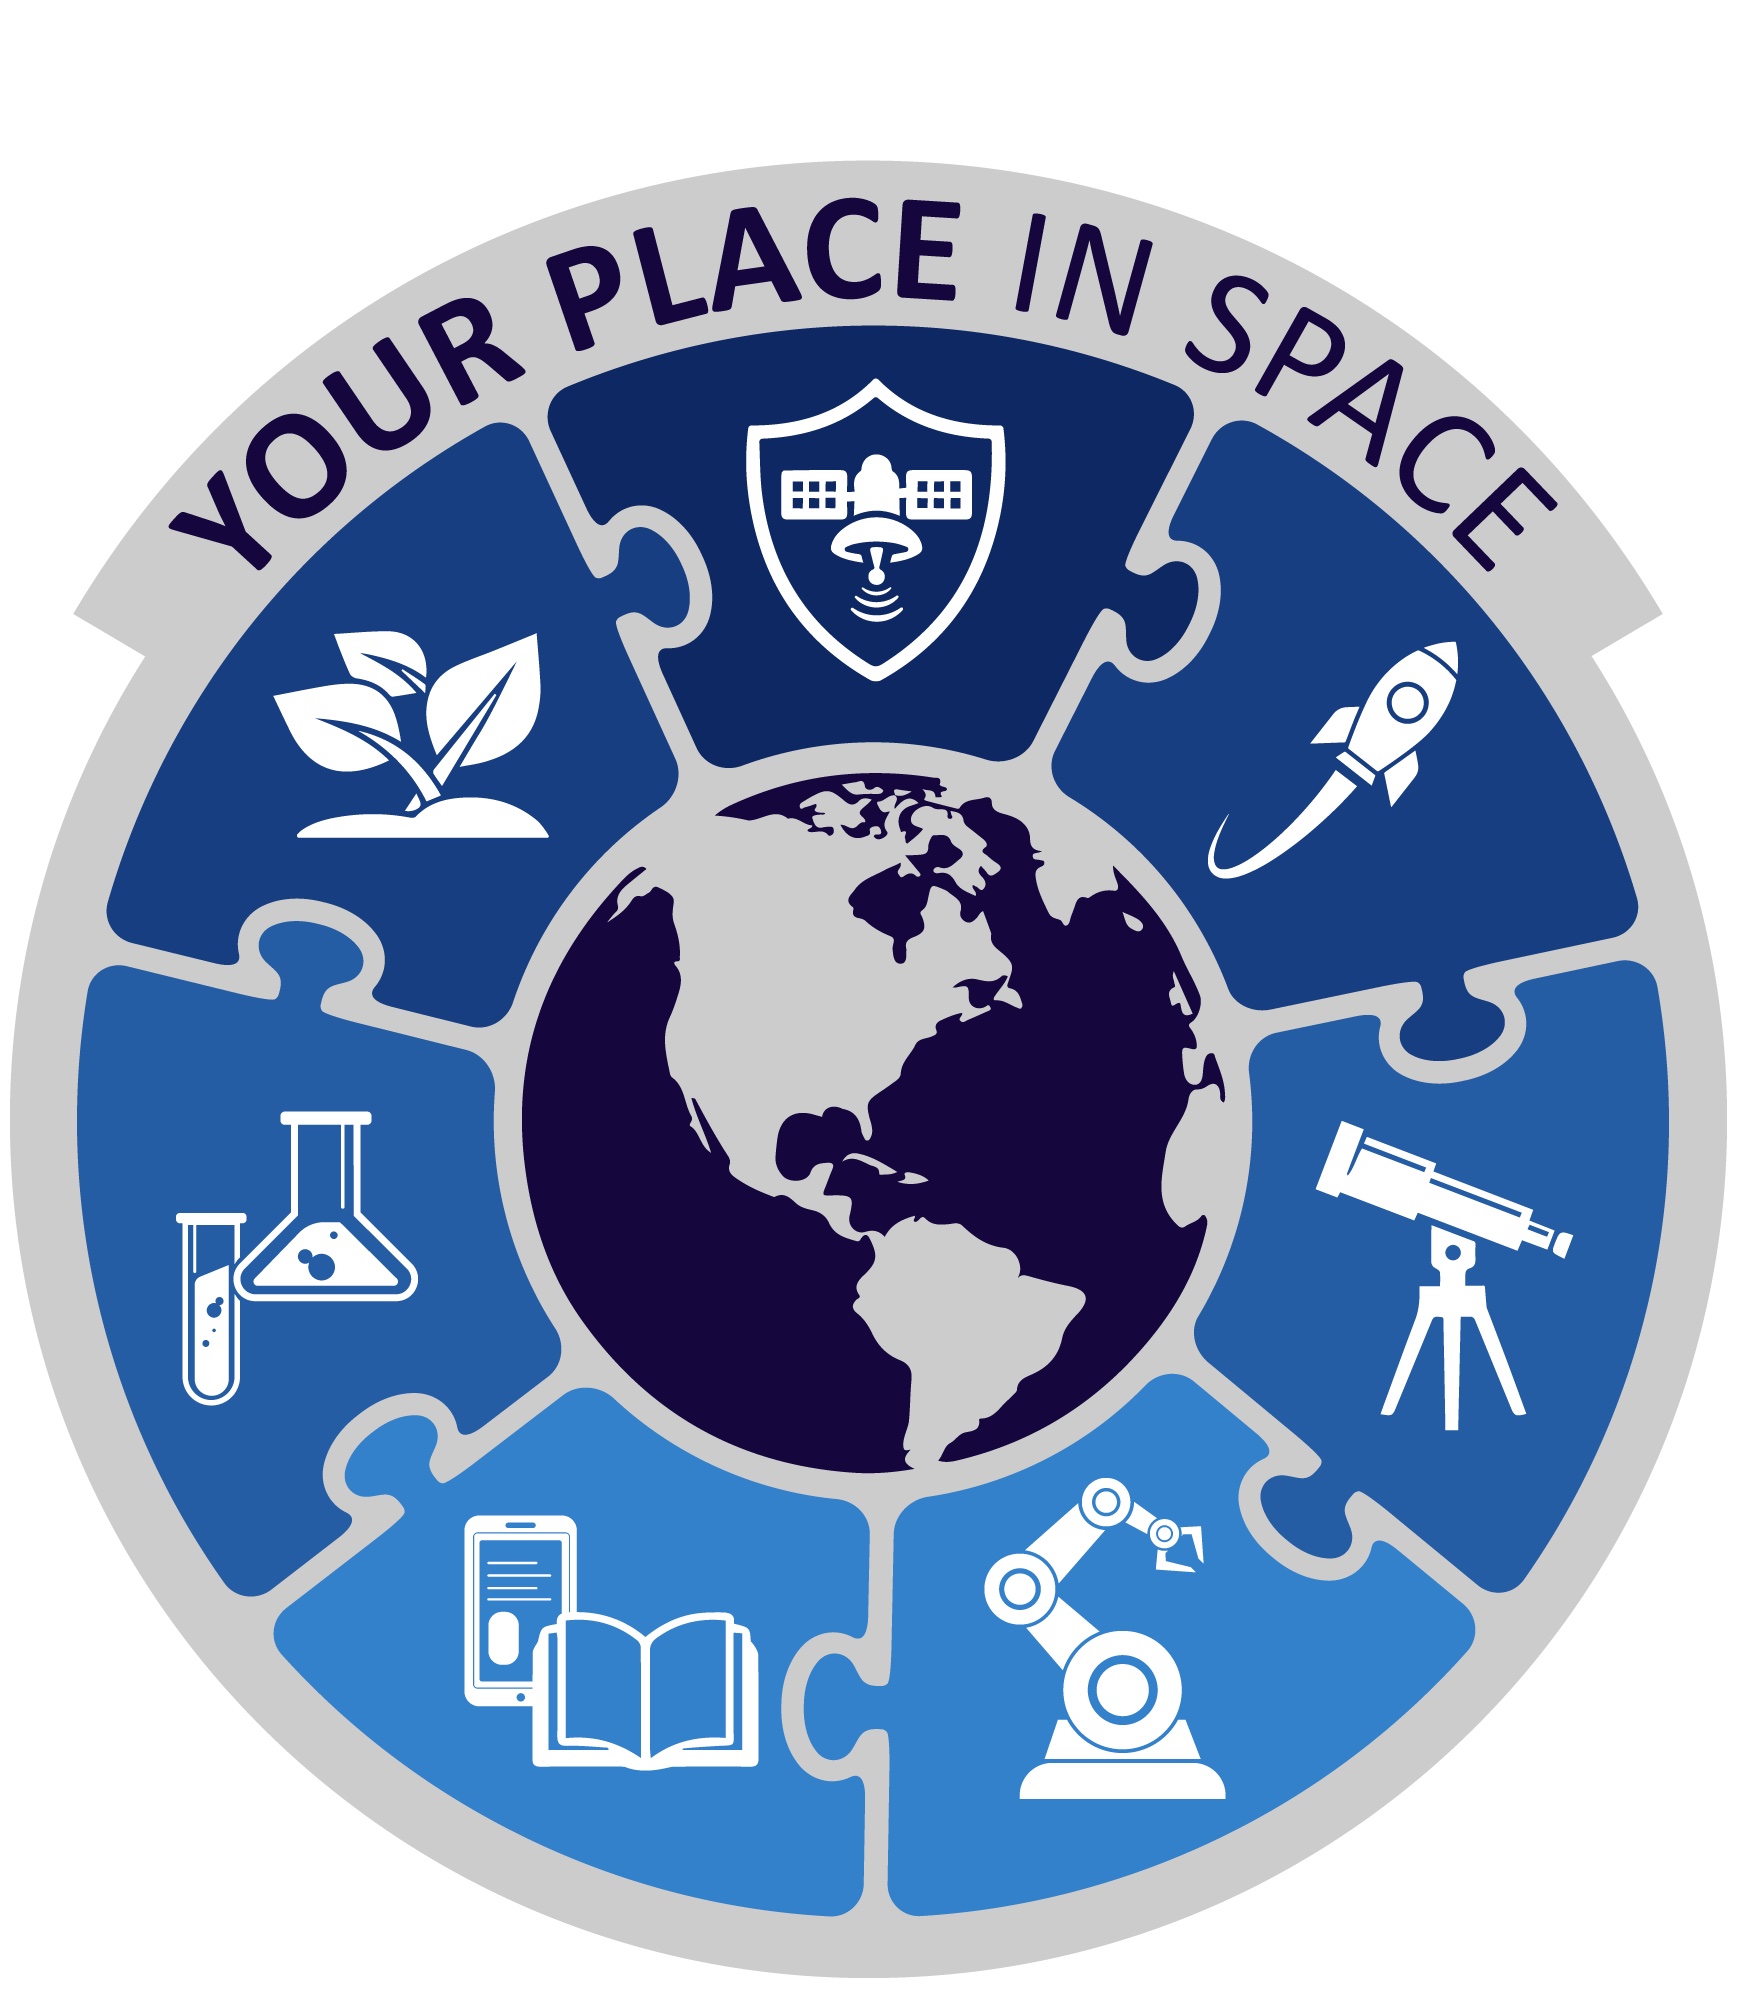 A circular graphic showing icons representing different types of occupations surrounding the globe with the words Your Place Space at the top.